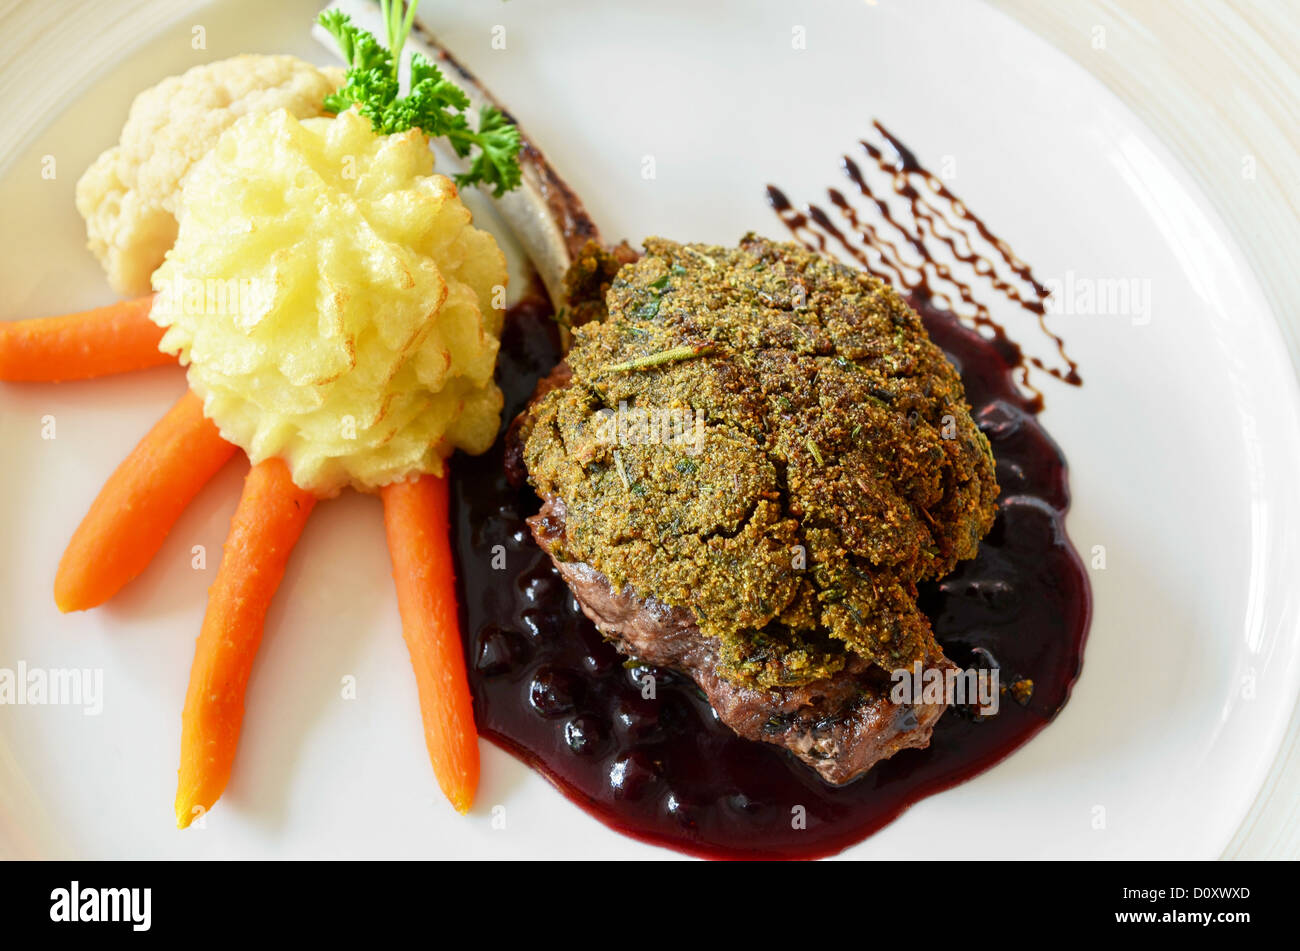 venison with whortleberry sause Stock Photo